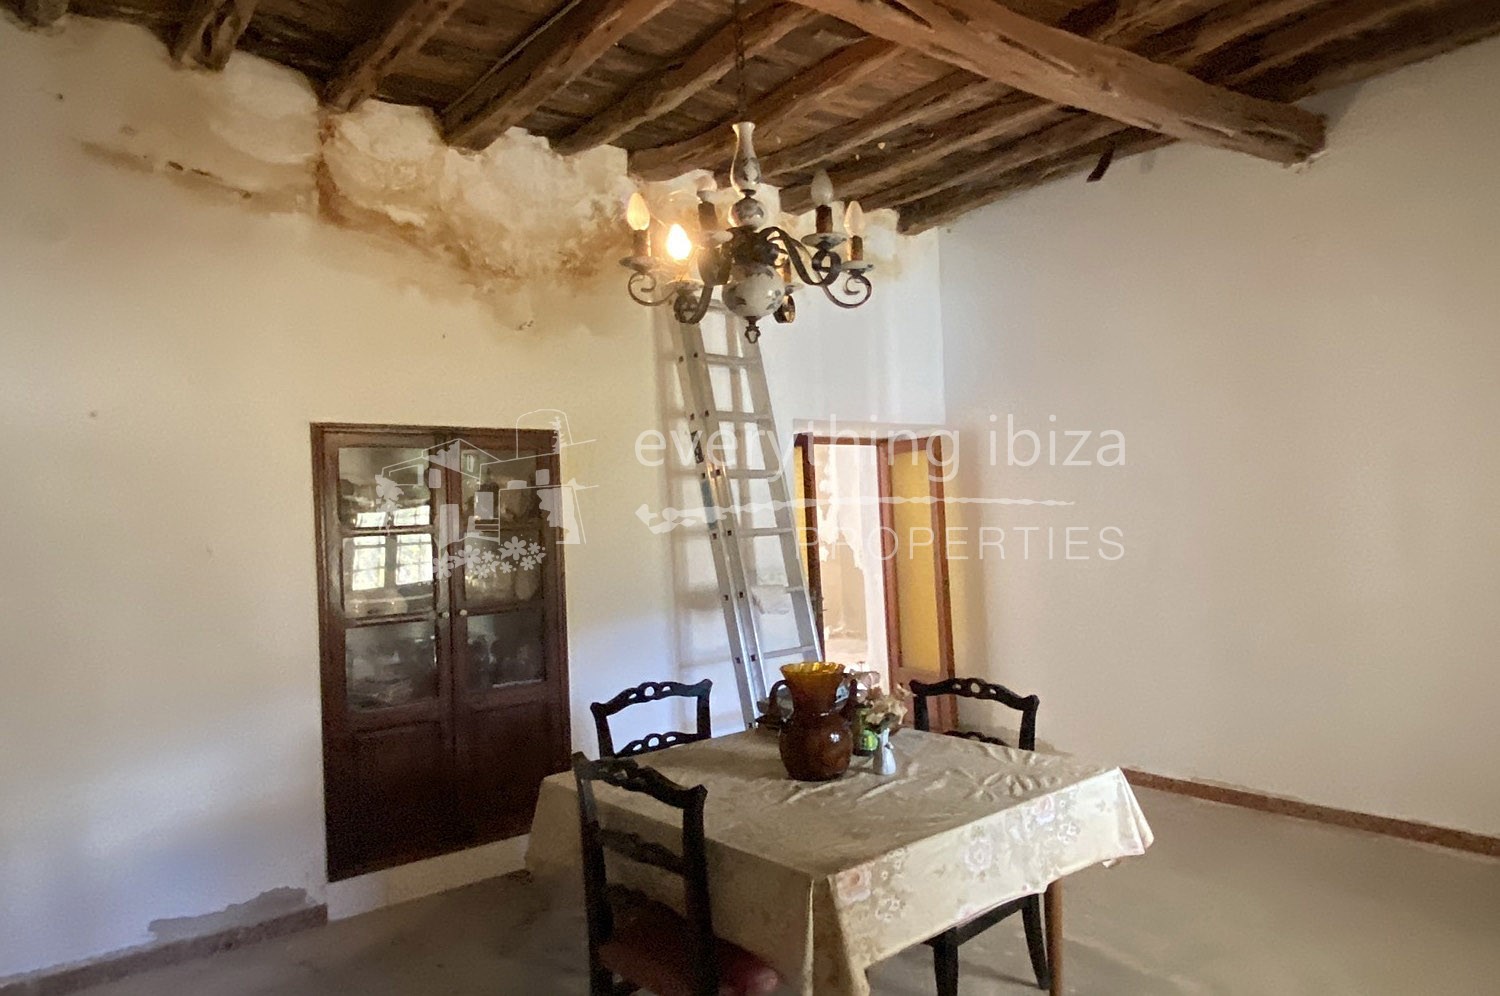 Detached villa & finca, ref. 1280, for sale in Ibiza by everything ibiza Properties